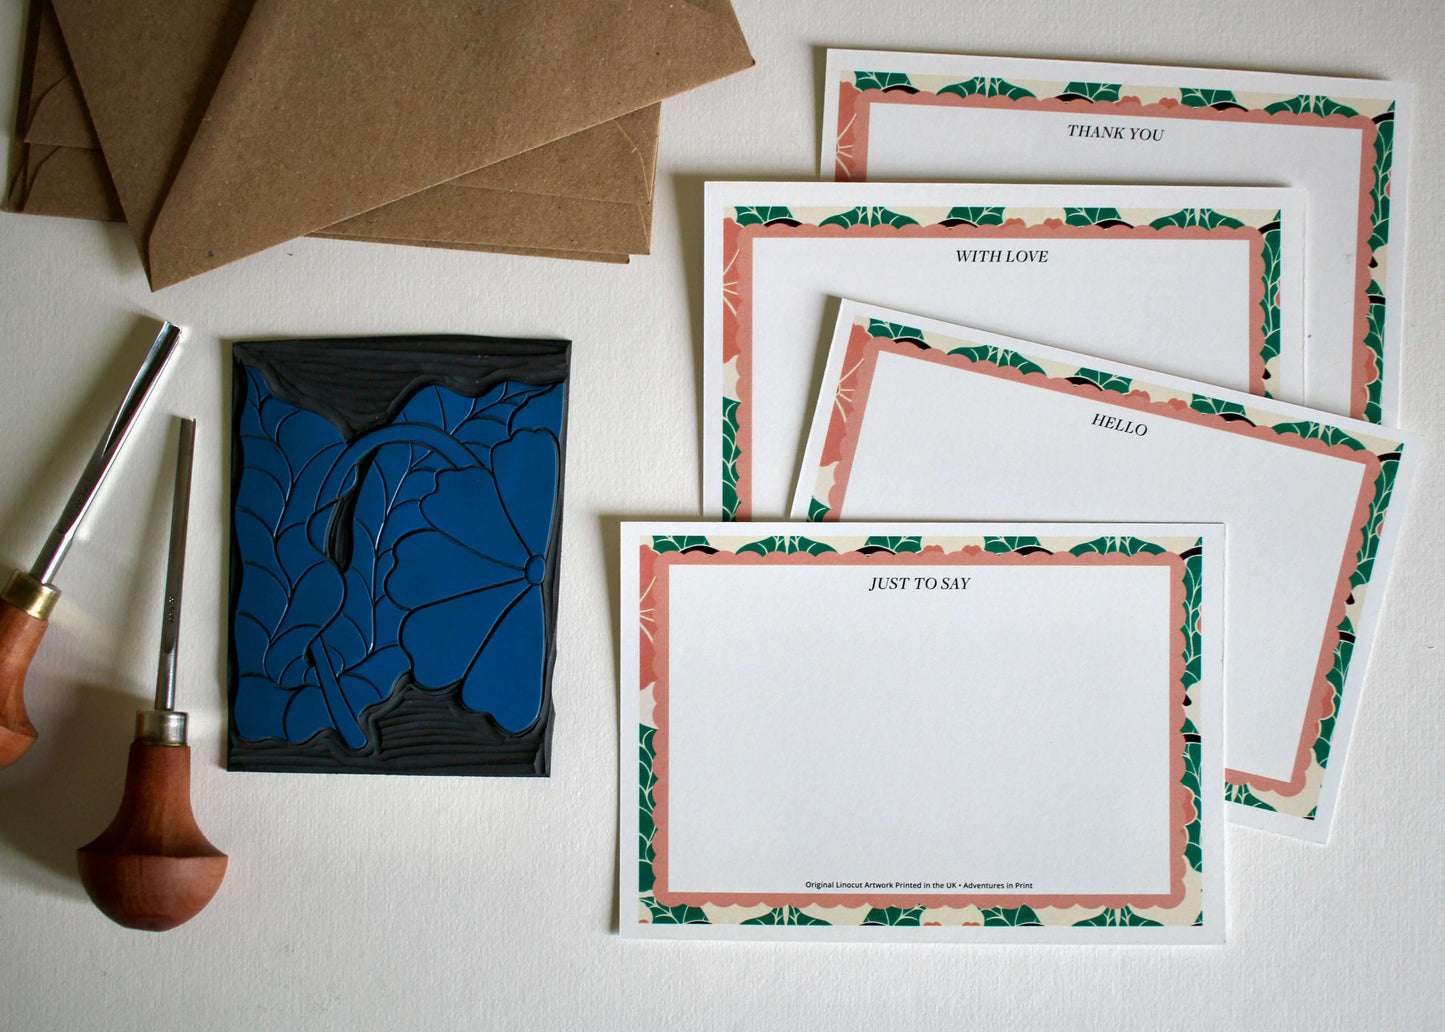 Leaning Floral Linocut Correspondence Cards - Set of 8